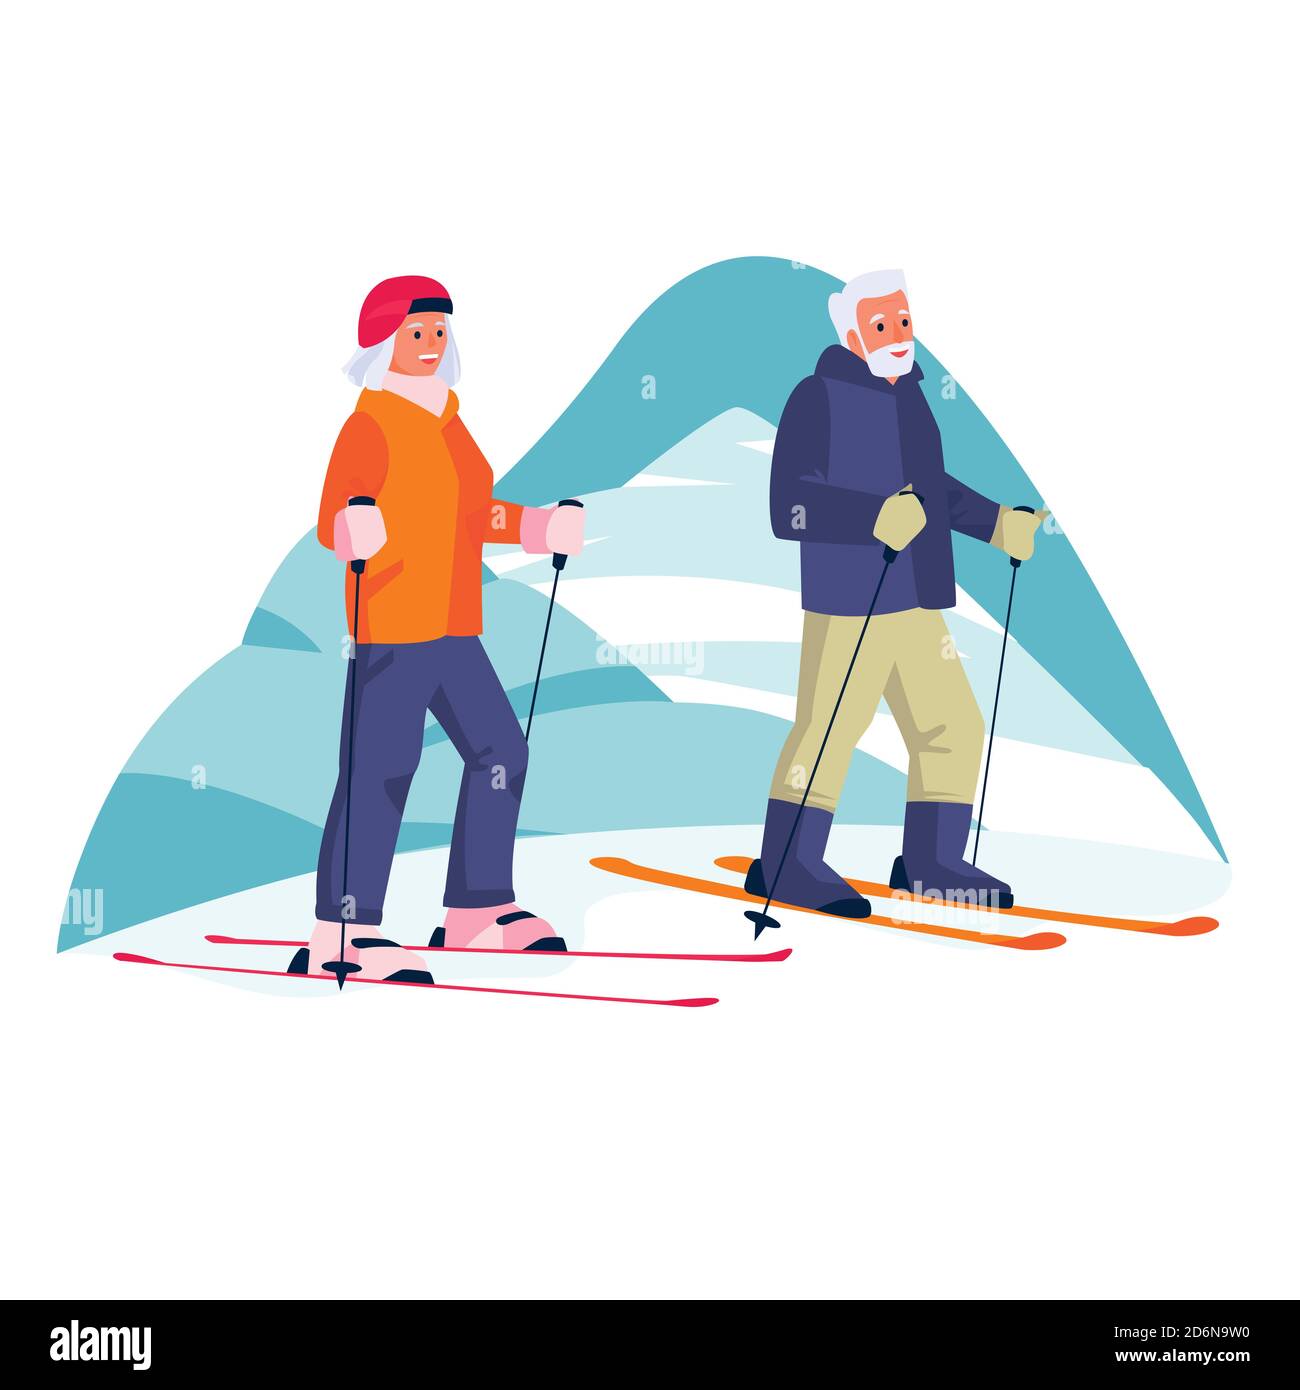 Elderly couple skiing in the mountains. Vector flat cartoon illustration of winter outdoor leisure. Concept of active healthy lifestyle of seniors. Stock Vector